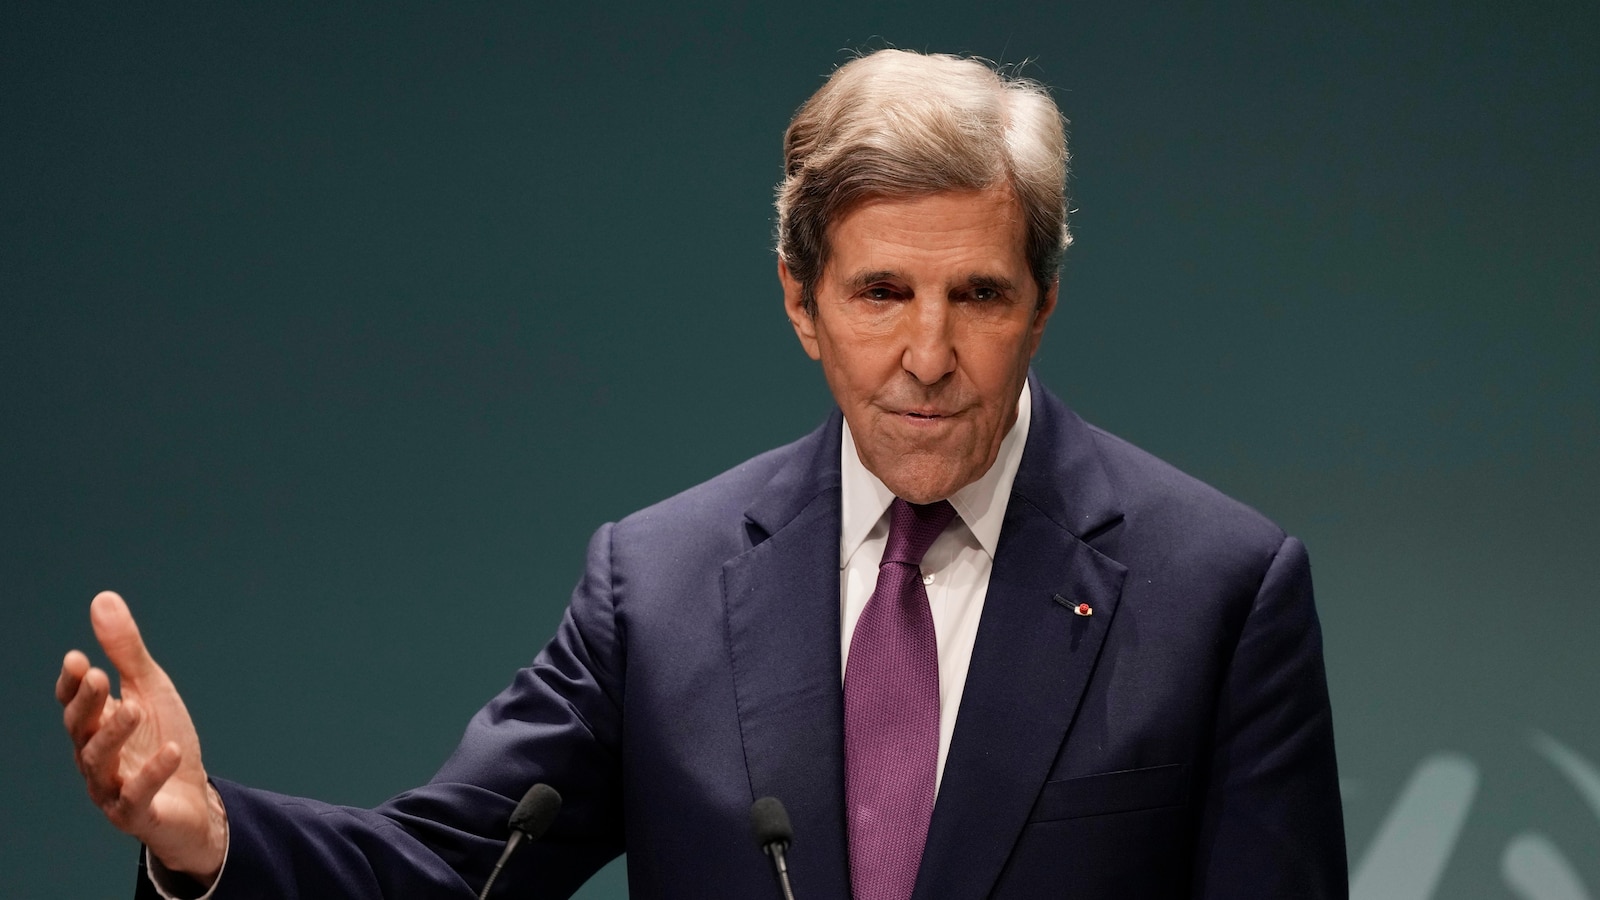 John Kerry, the US climate envoy, announces departure from the Biden administration